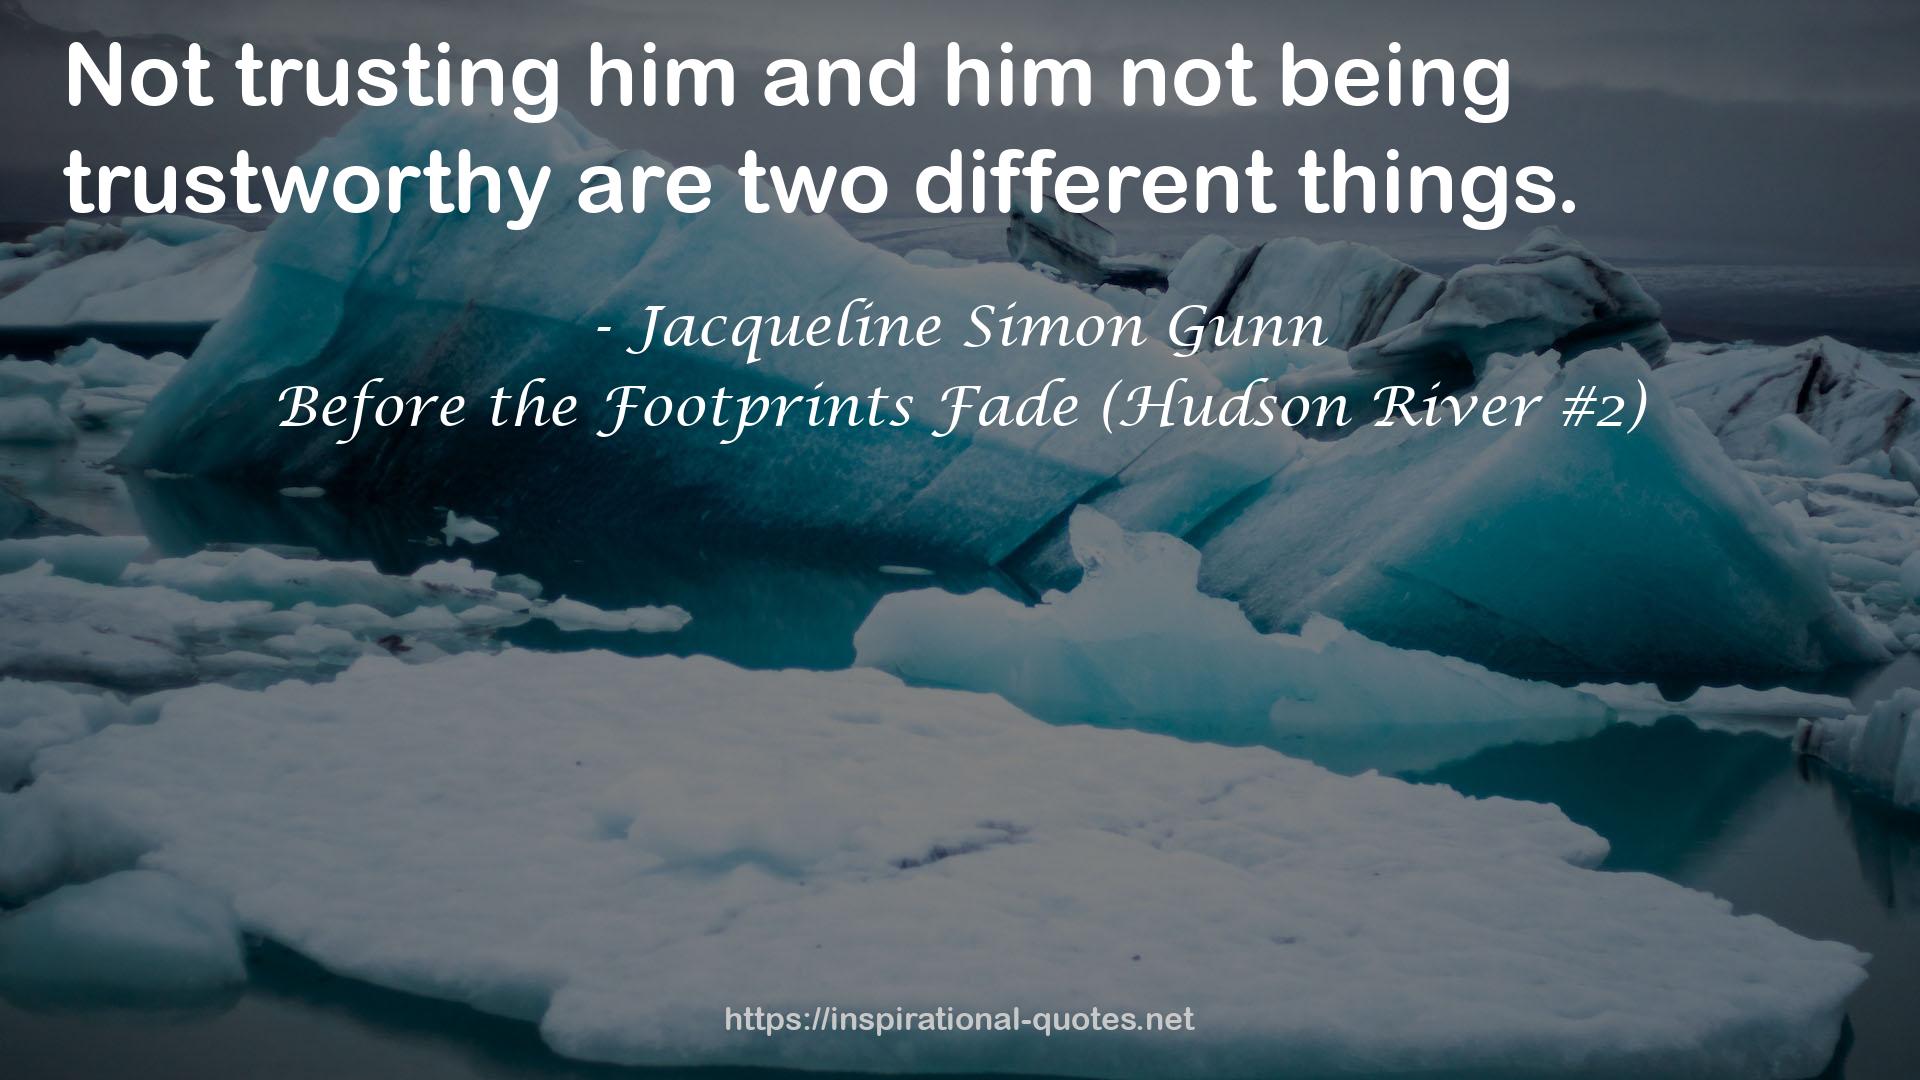 Before the Footprints Fade (Hudson River #2) QUOTES